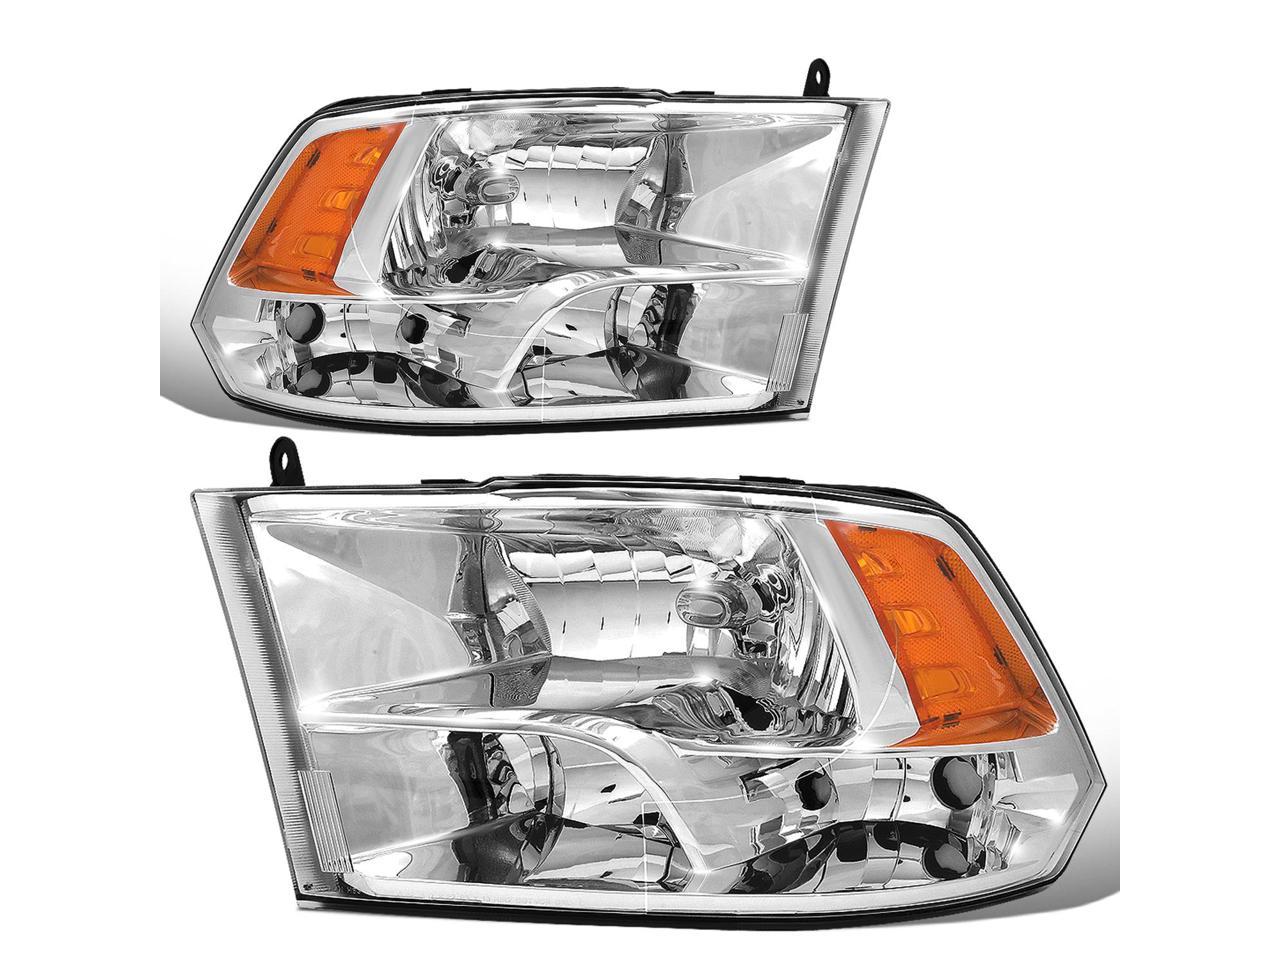 Pair of Smoked Housing Amber Corner Left+Right Headlight Assembly Lamps Compatible with Altima Sedan 10-12 